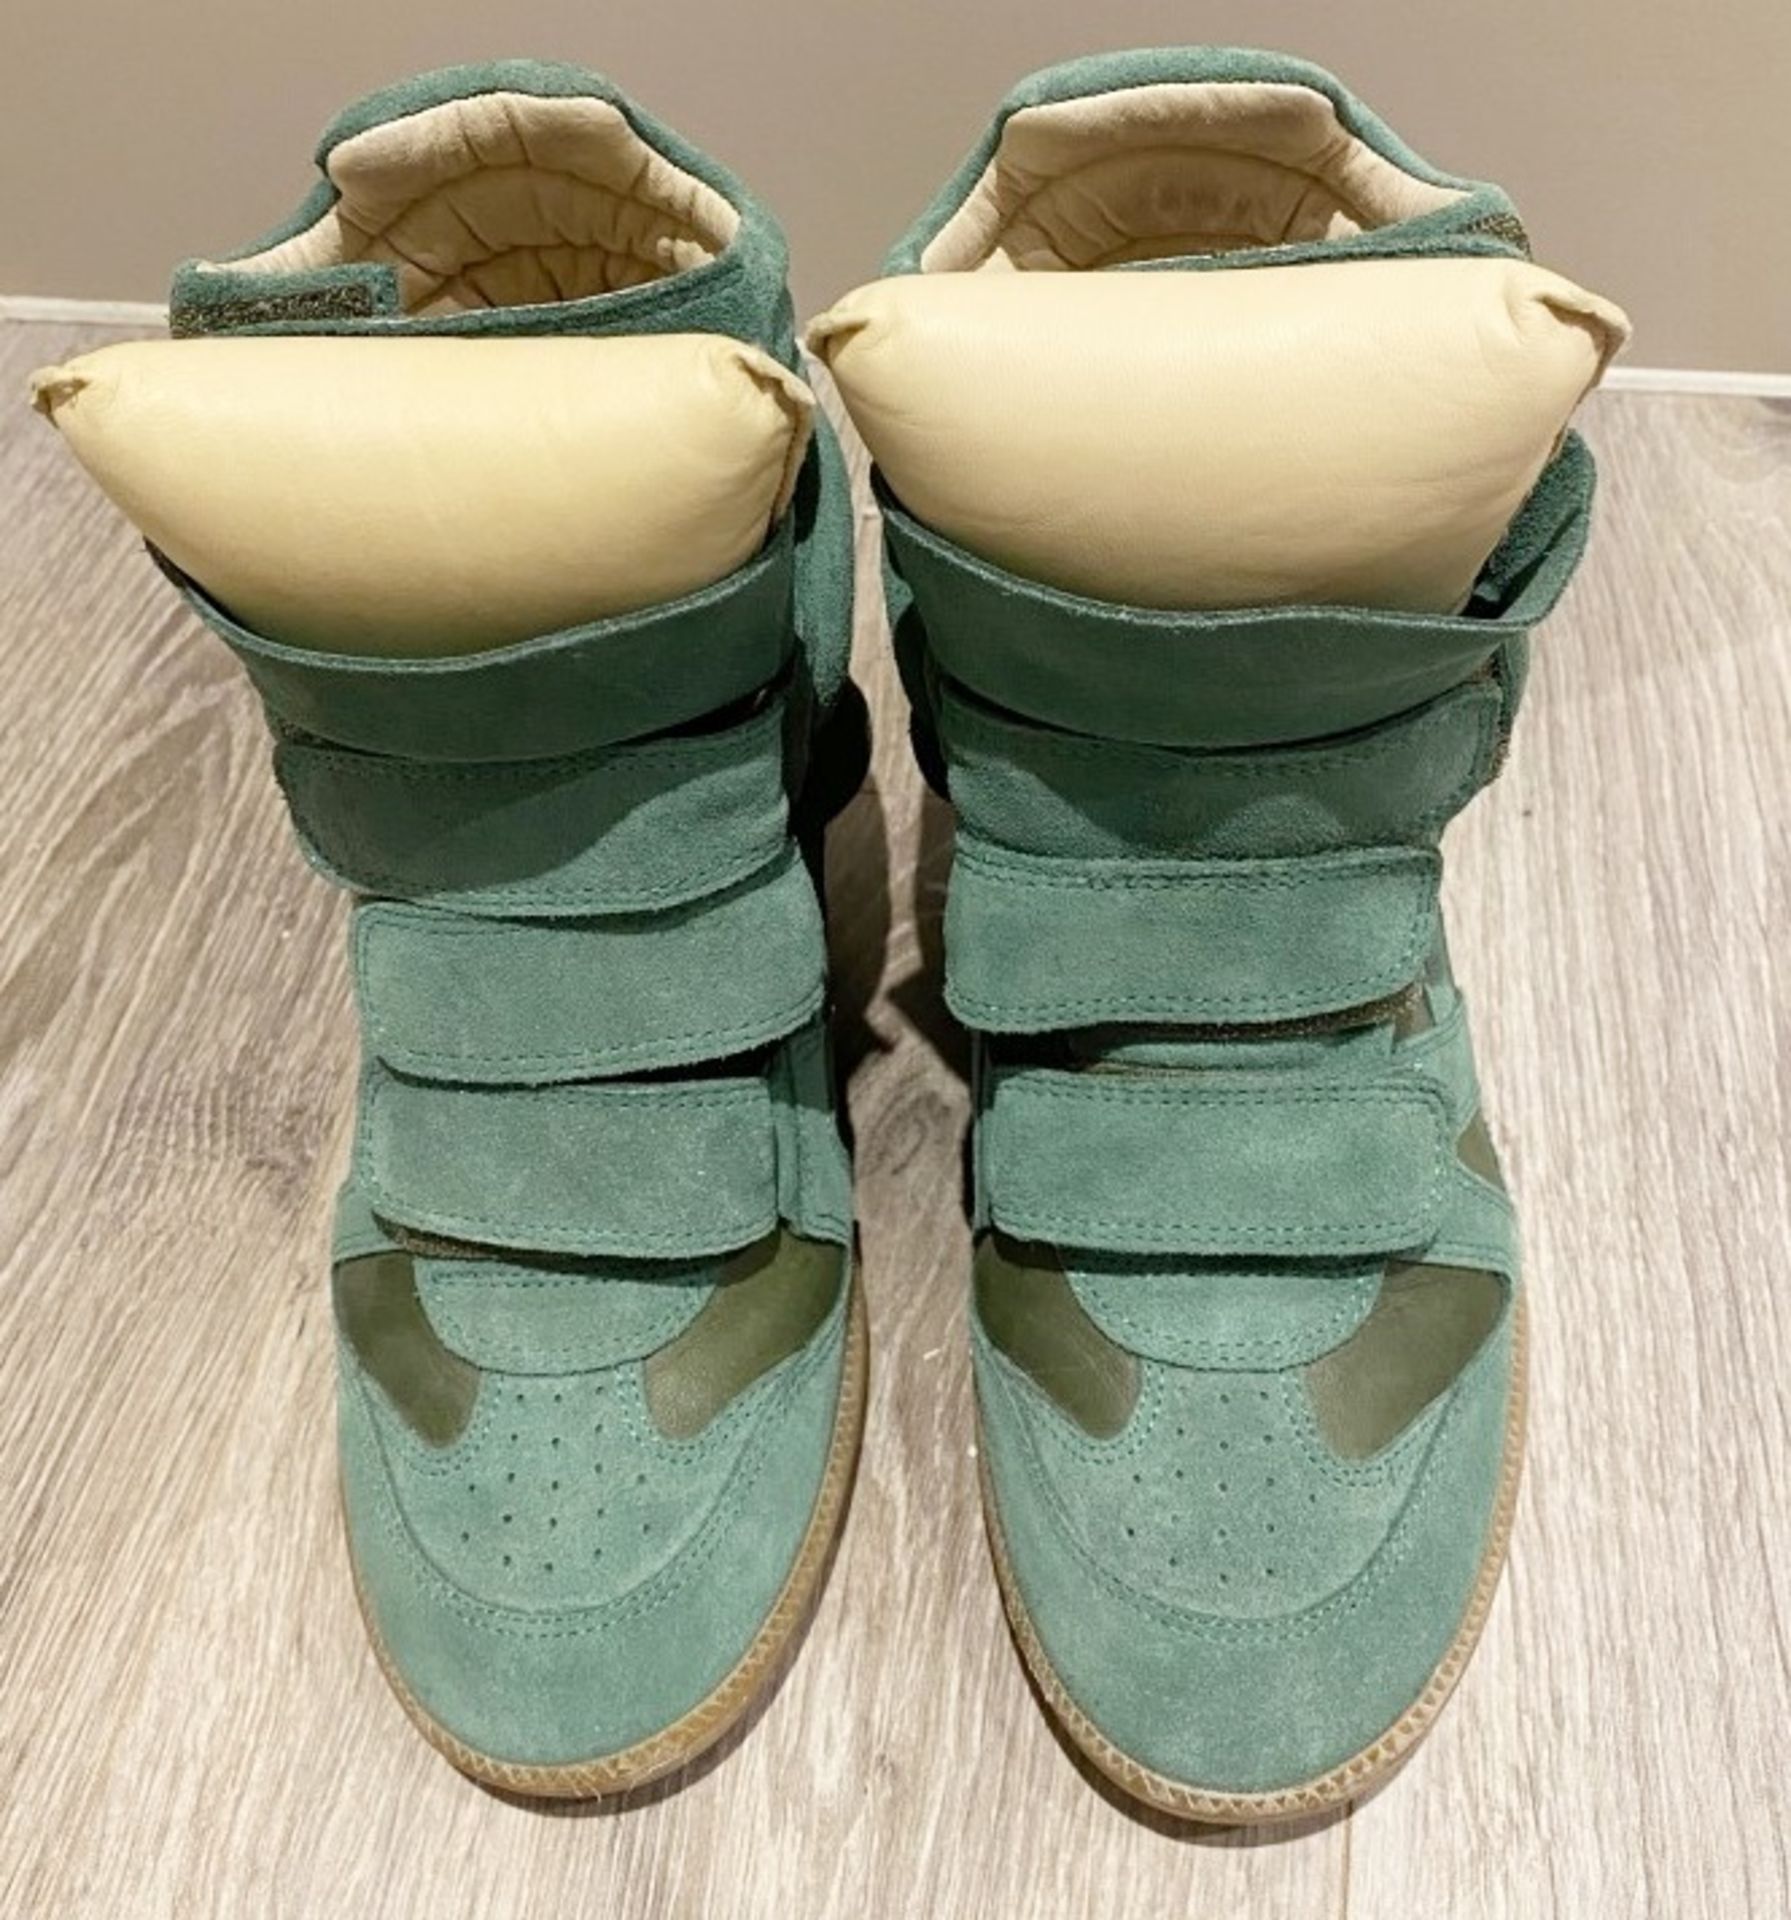 1 x Pair Of Genuine Isabel Marant Boots In Green - Size: 36 - Preowned in Good Condition - Ref: LOT3 - Image 2 of 4